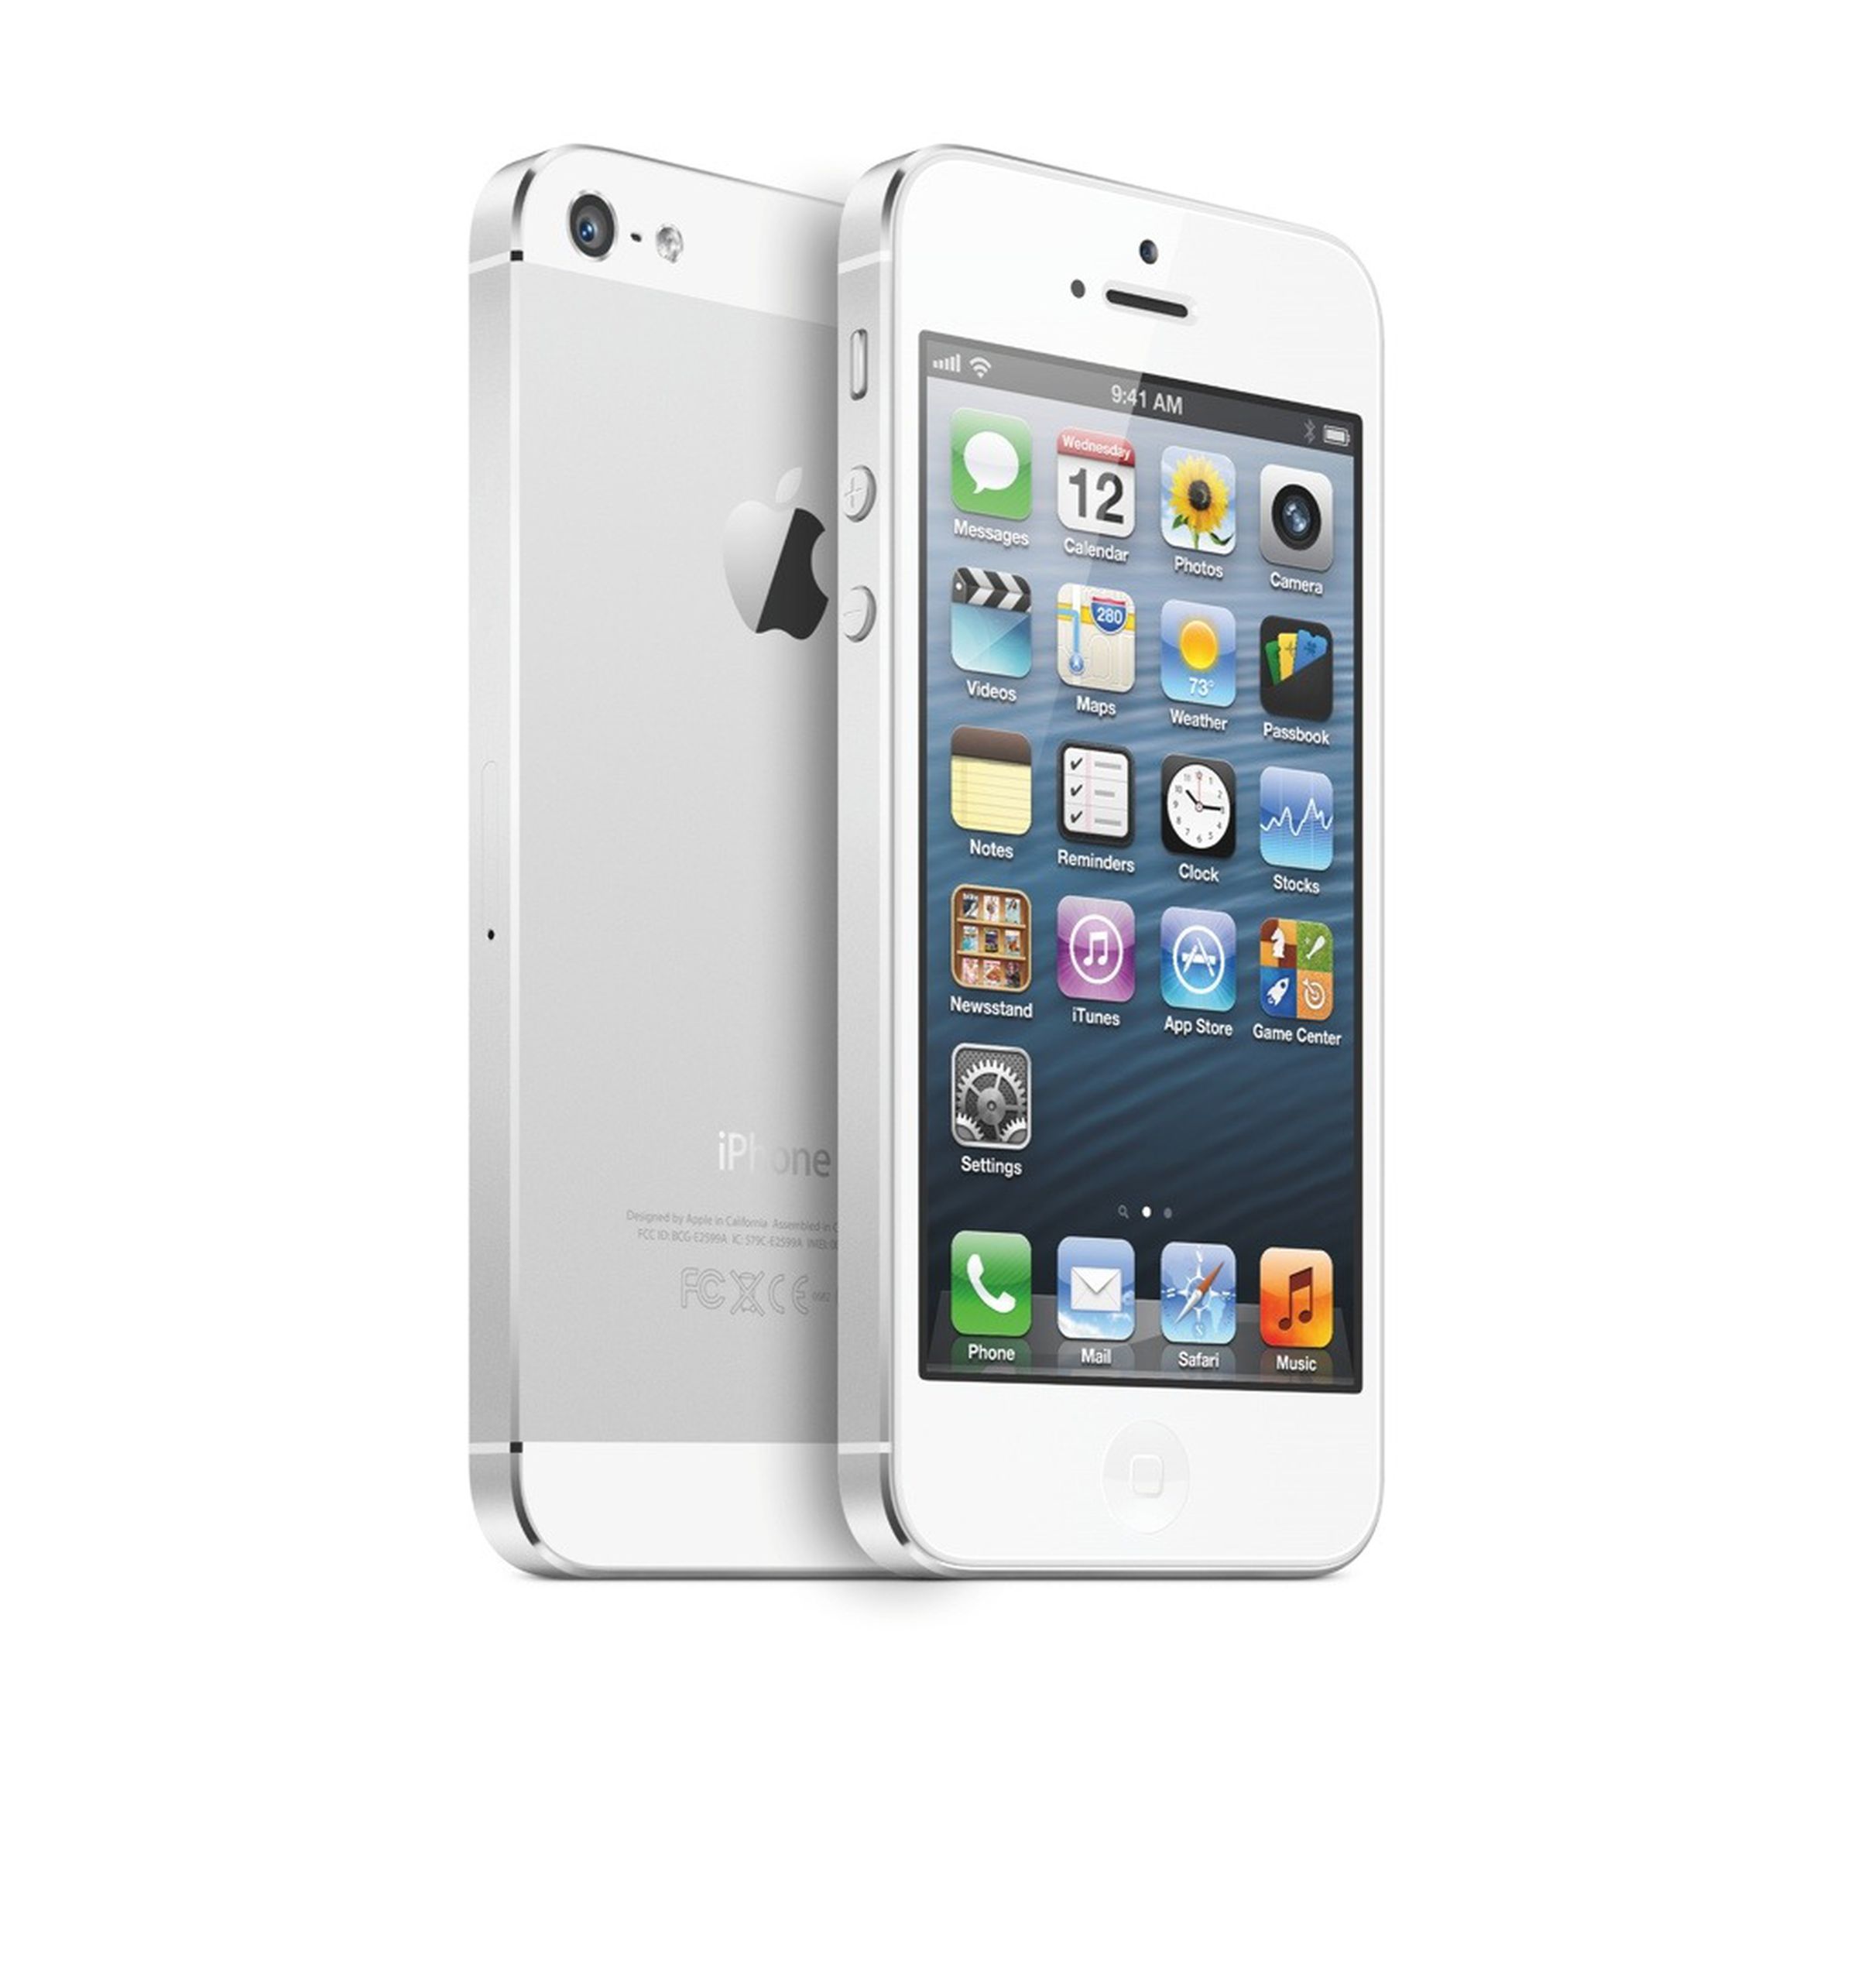 iPhone 5 press pictures